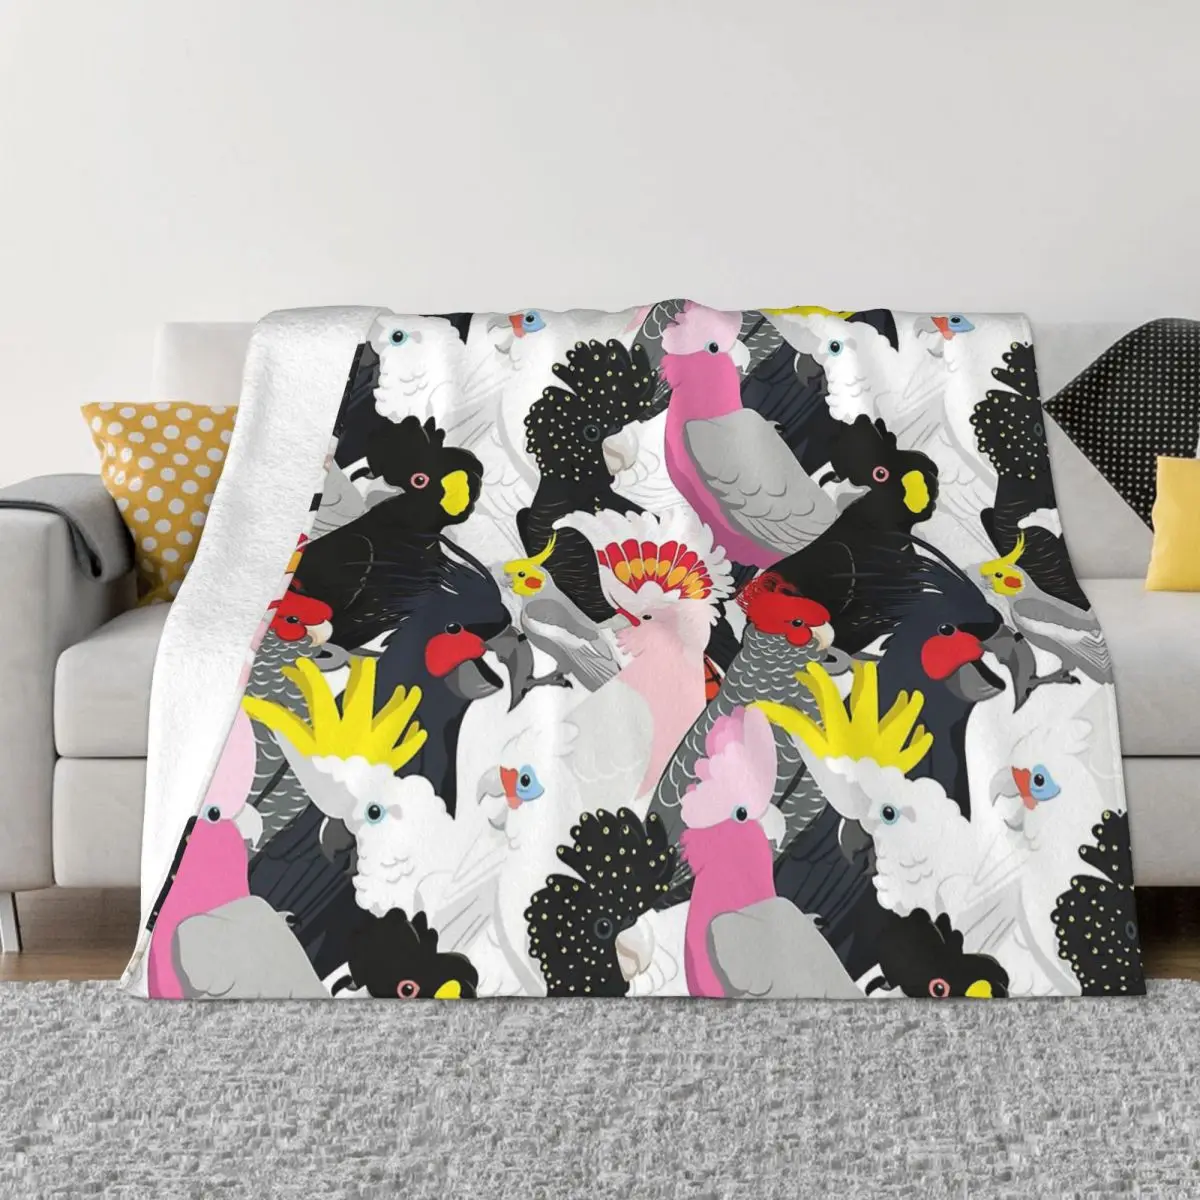 

Parrot Bird Cockatoo Fest Portable Warm Throw Blankets for Bedding Travel